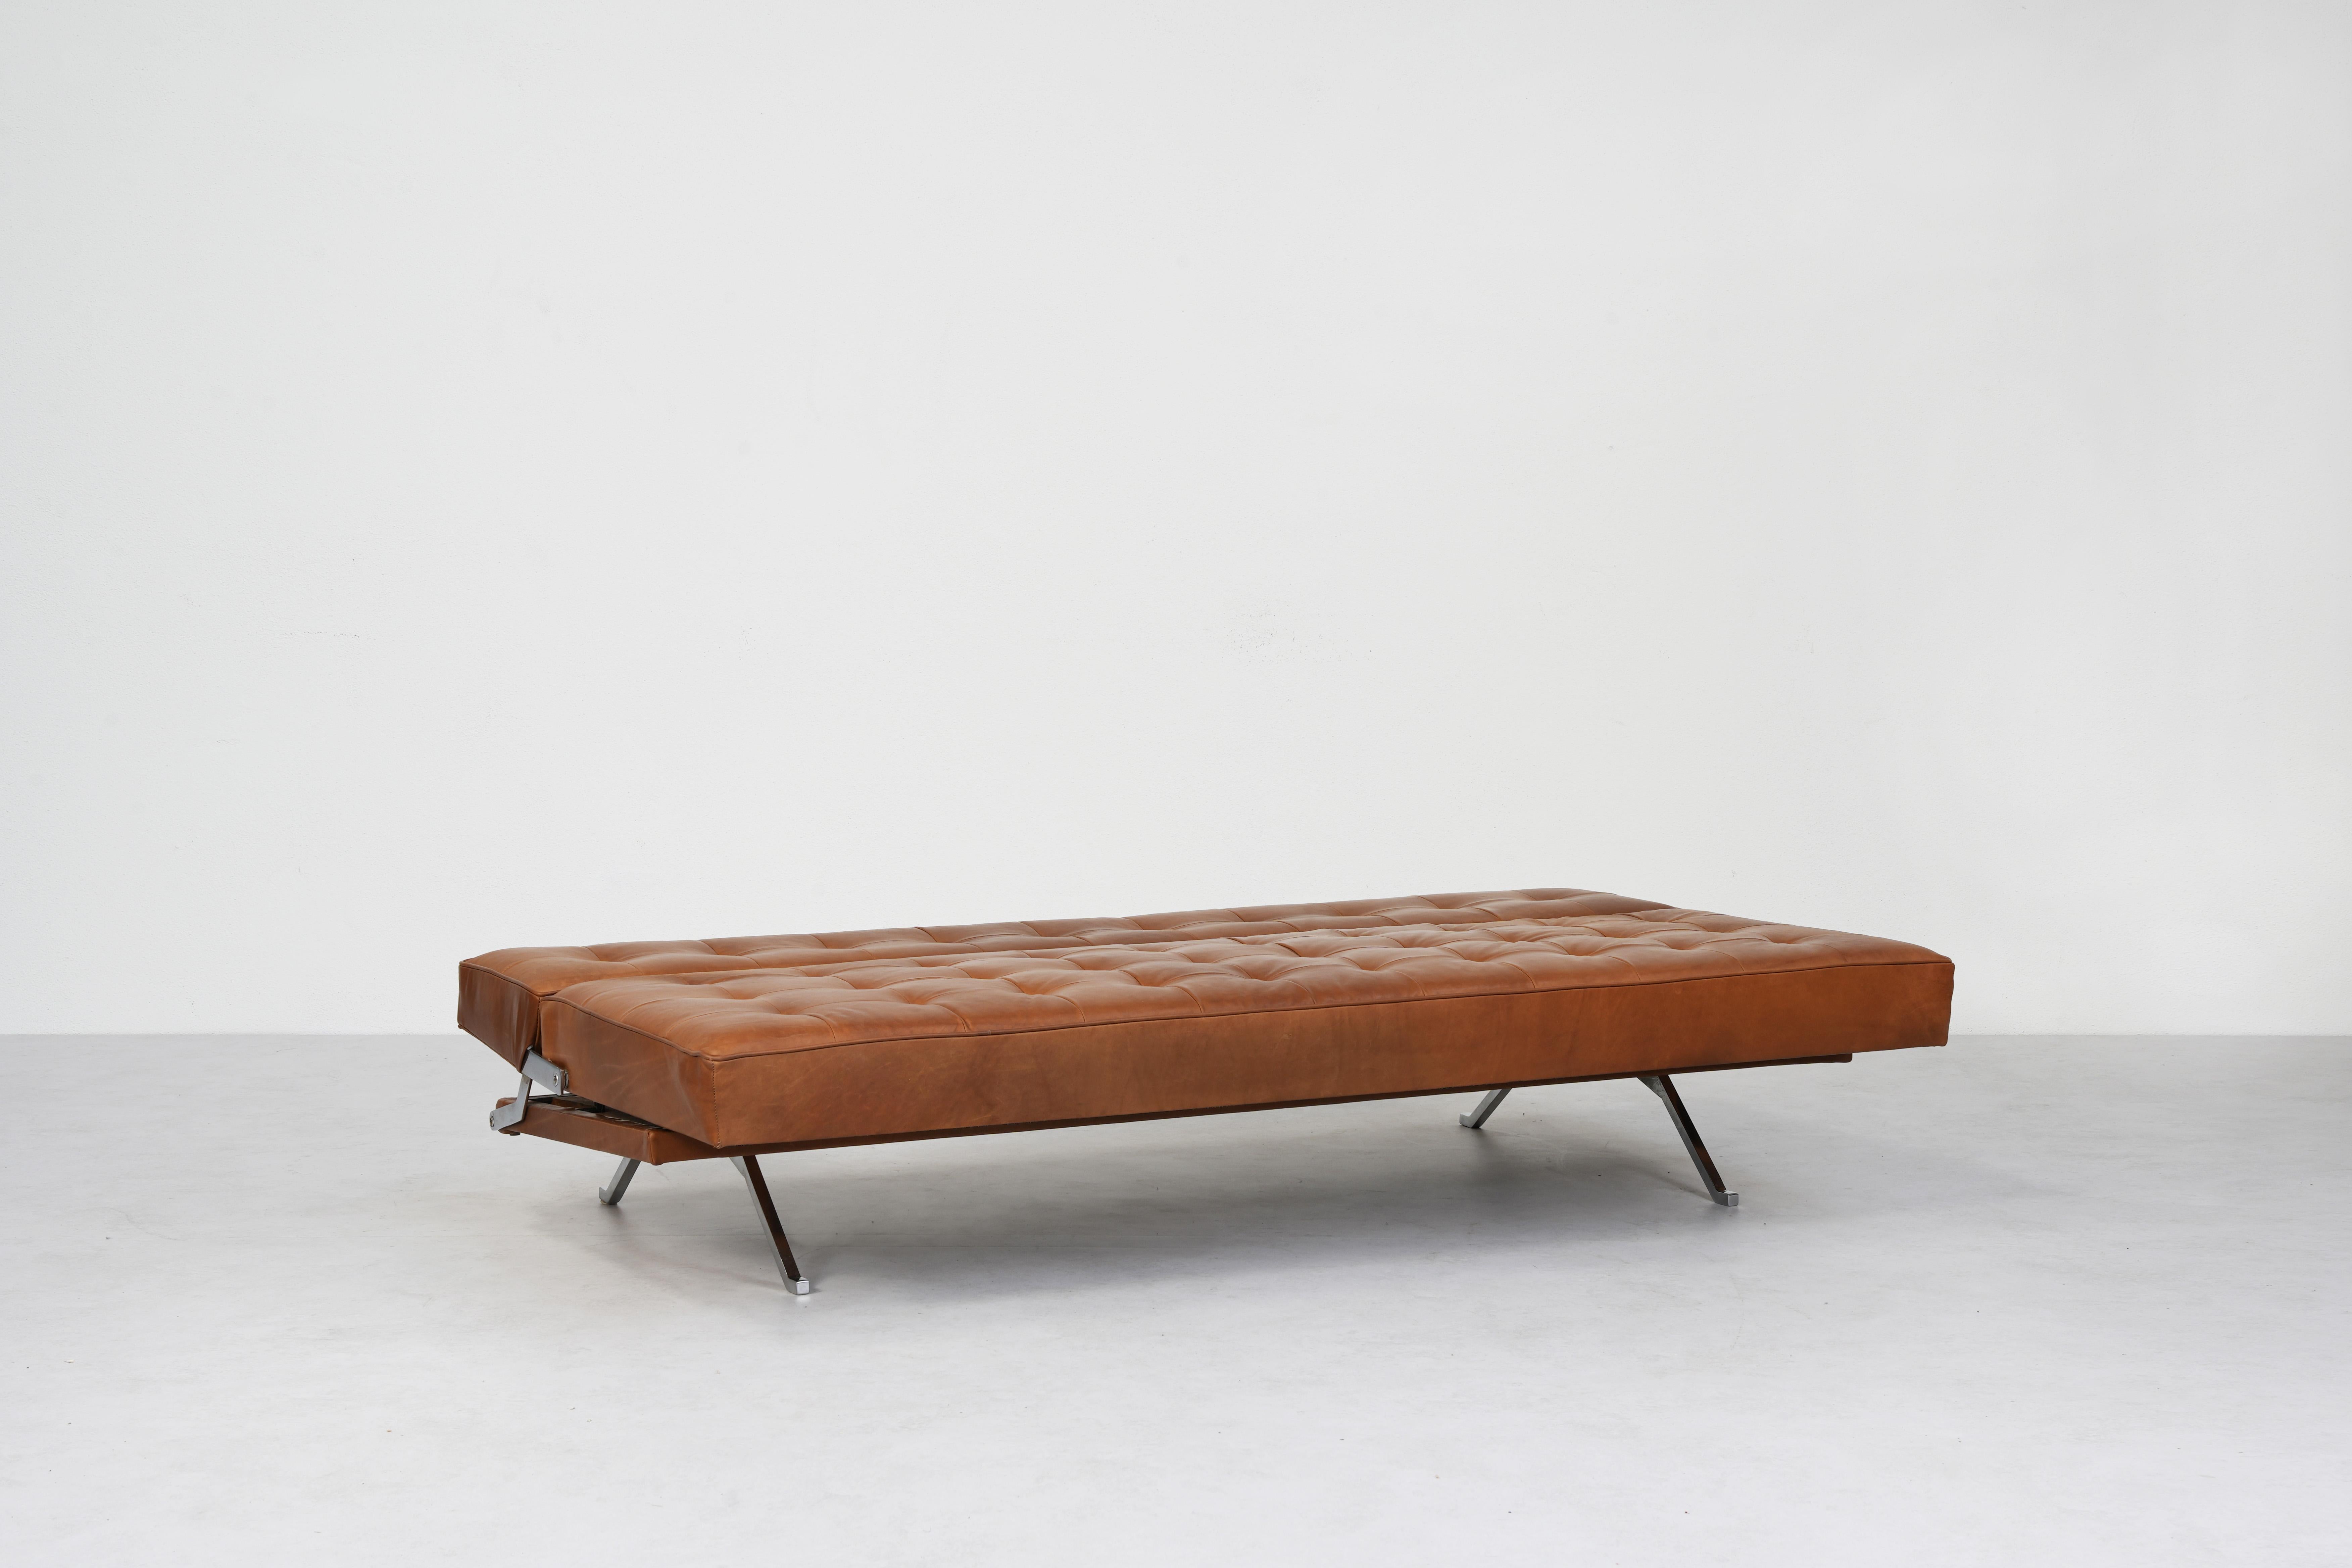 20th Century Sofa Daybed Constanze by Johannes Spalt for Wittmann, Austria 1960ies For Sale